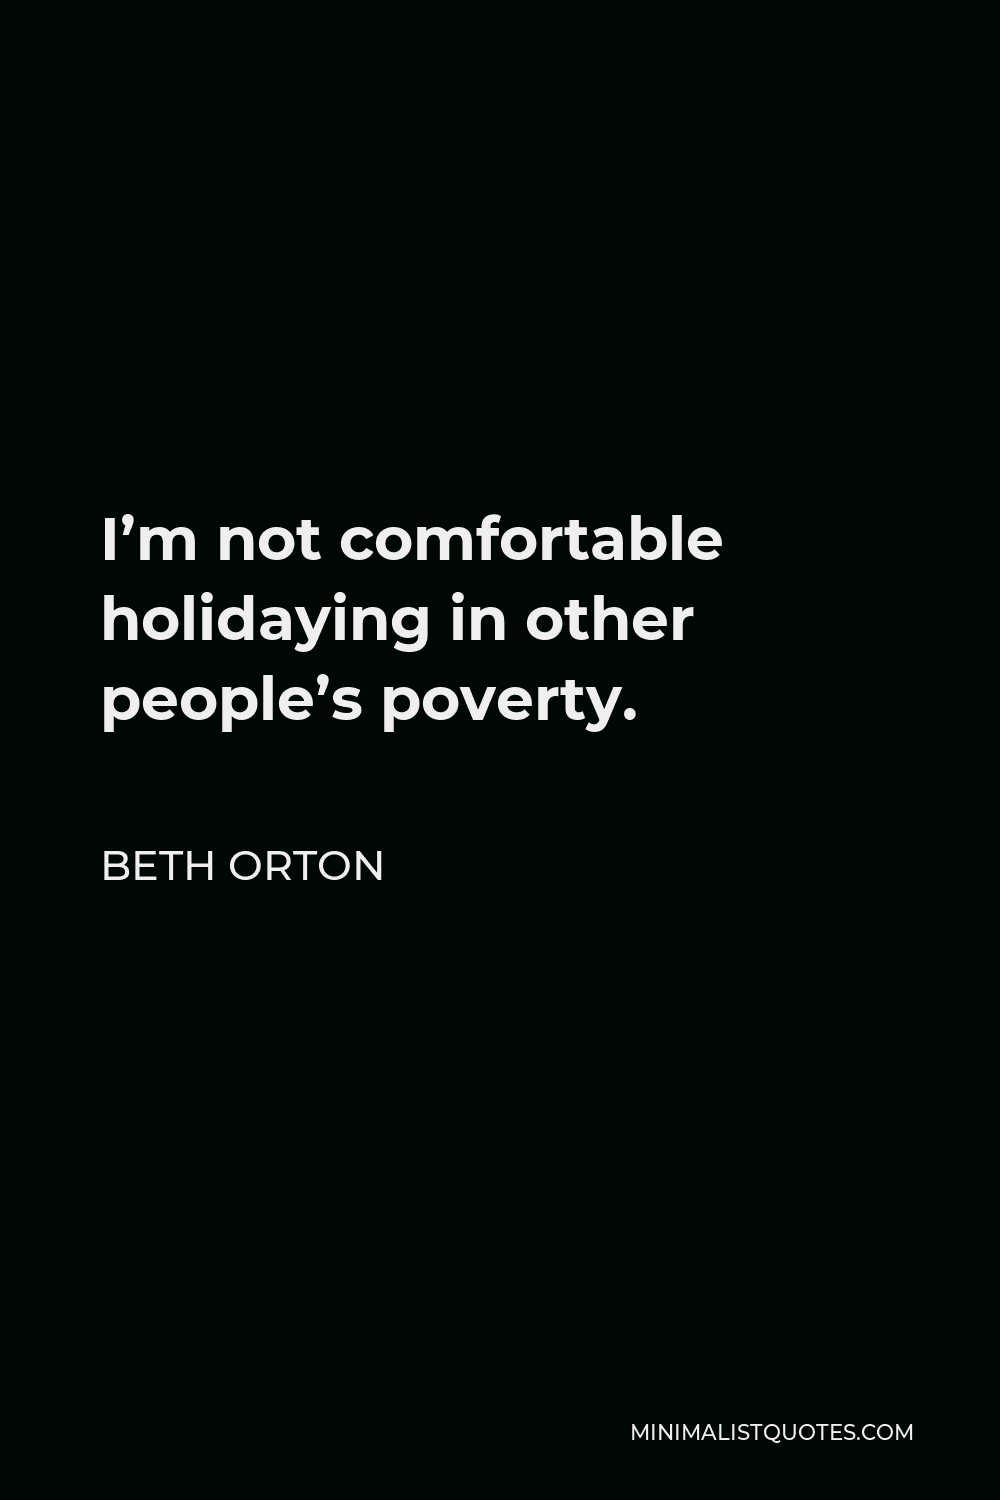 Beth Orton Quote - I’m not comfortable holidaying in other people’s poverty.